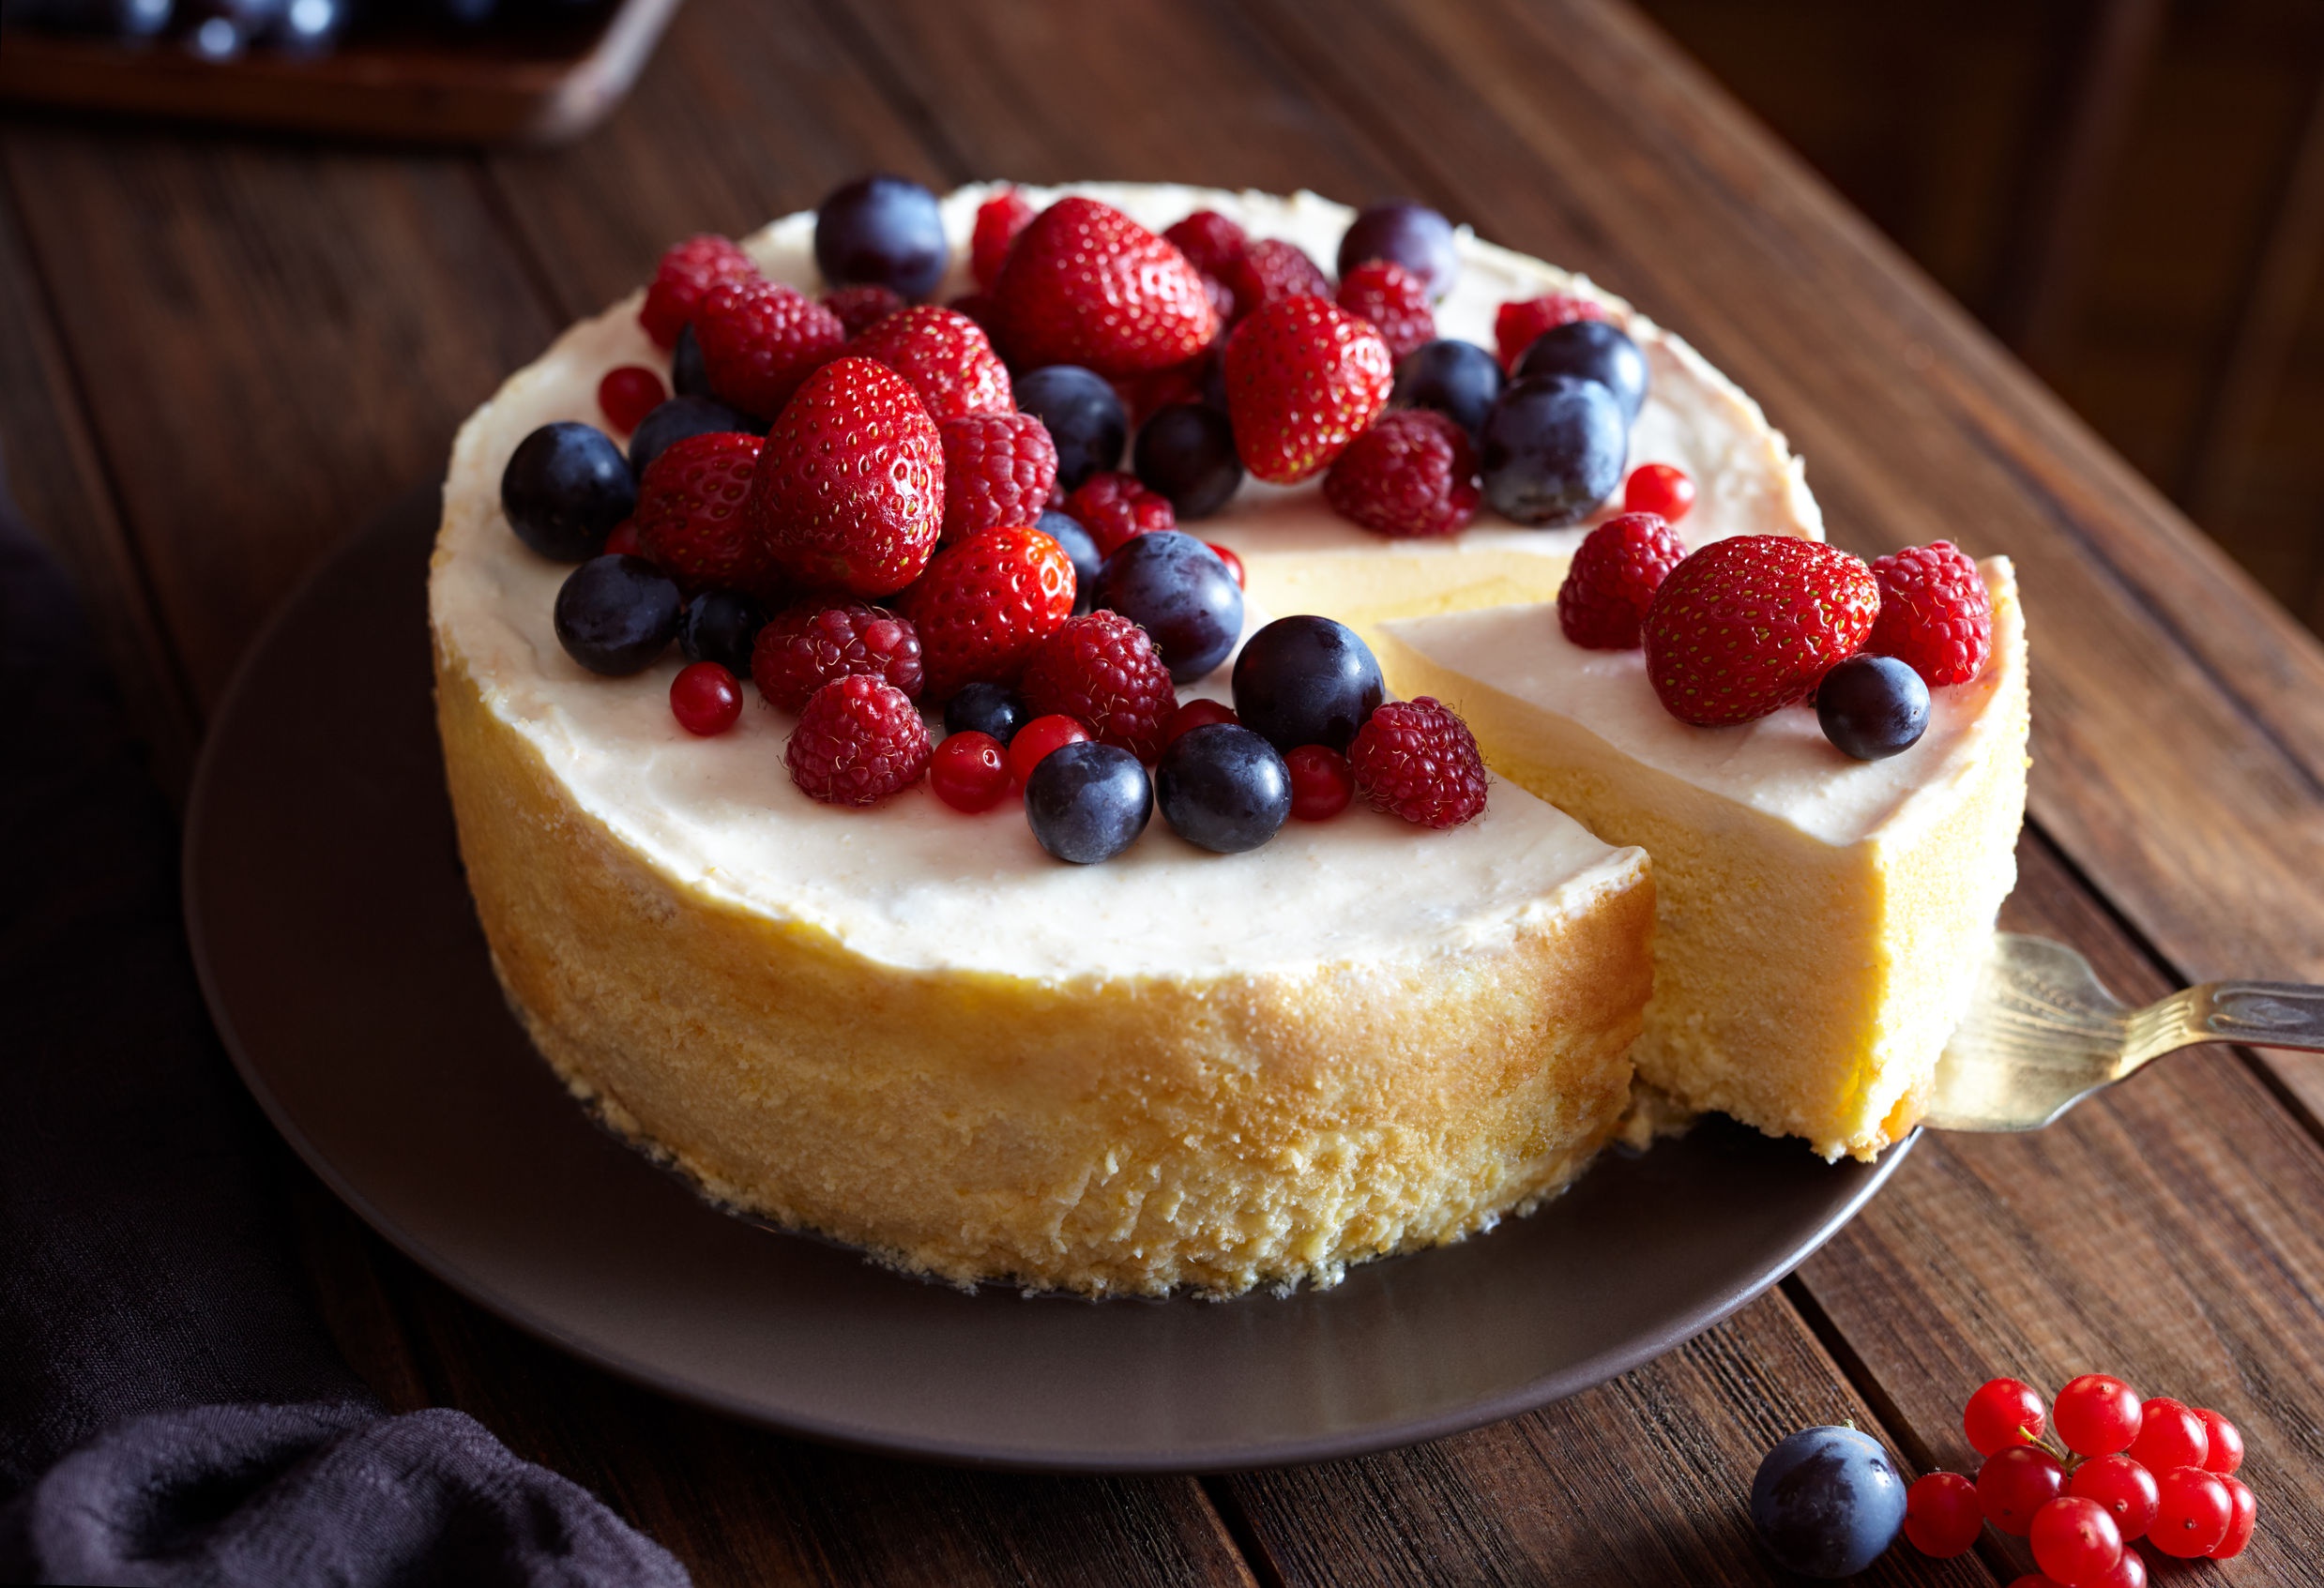 Cheesecake Hd Wallpaper - New York Baked Cheesecake Decoration , HD Wallpaper & Backgrounds